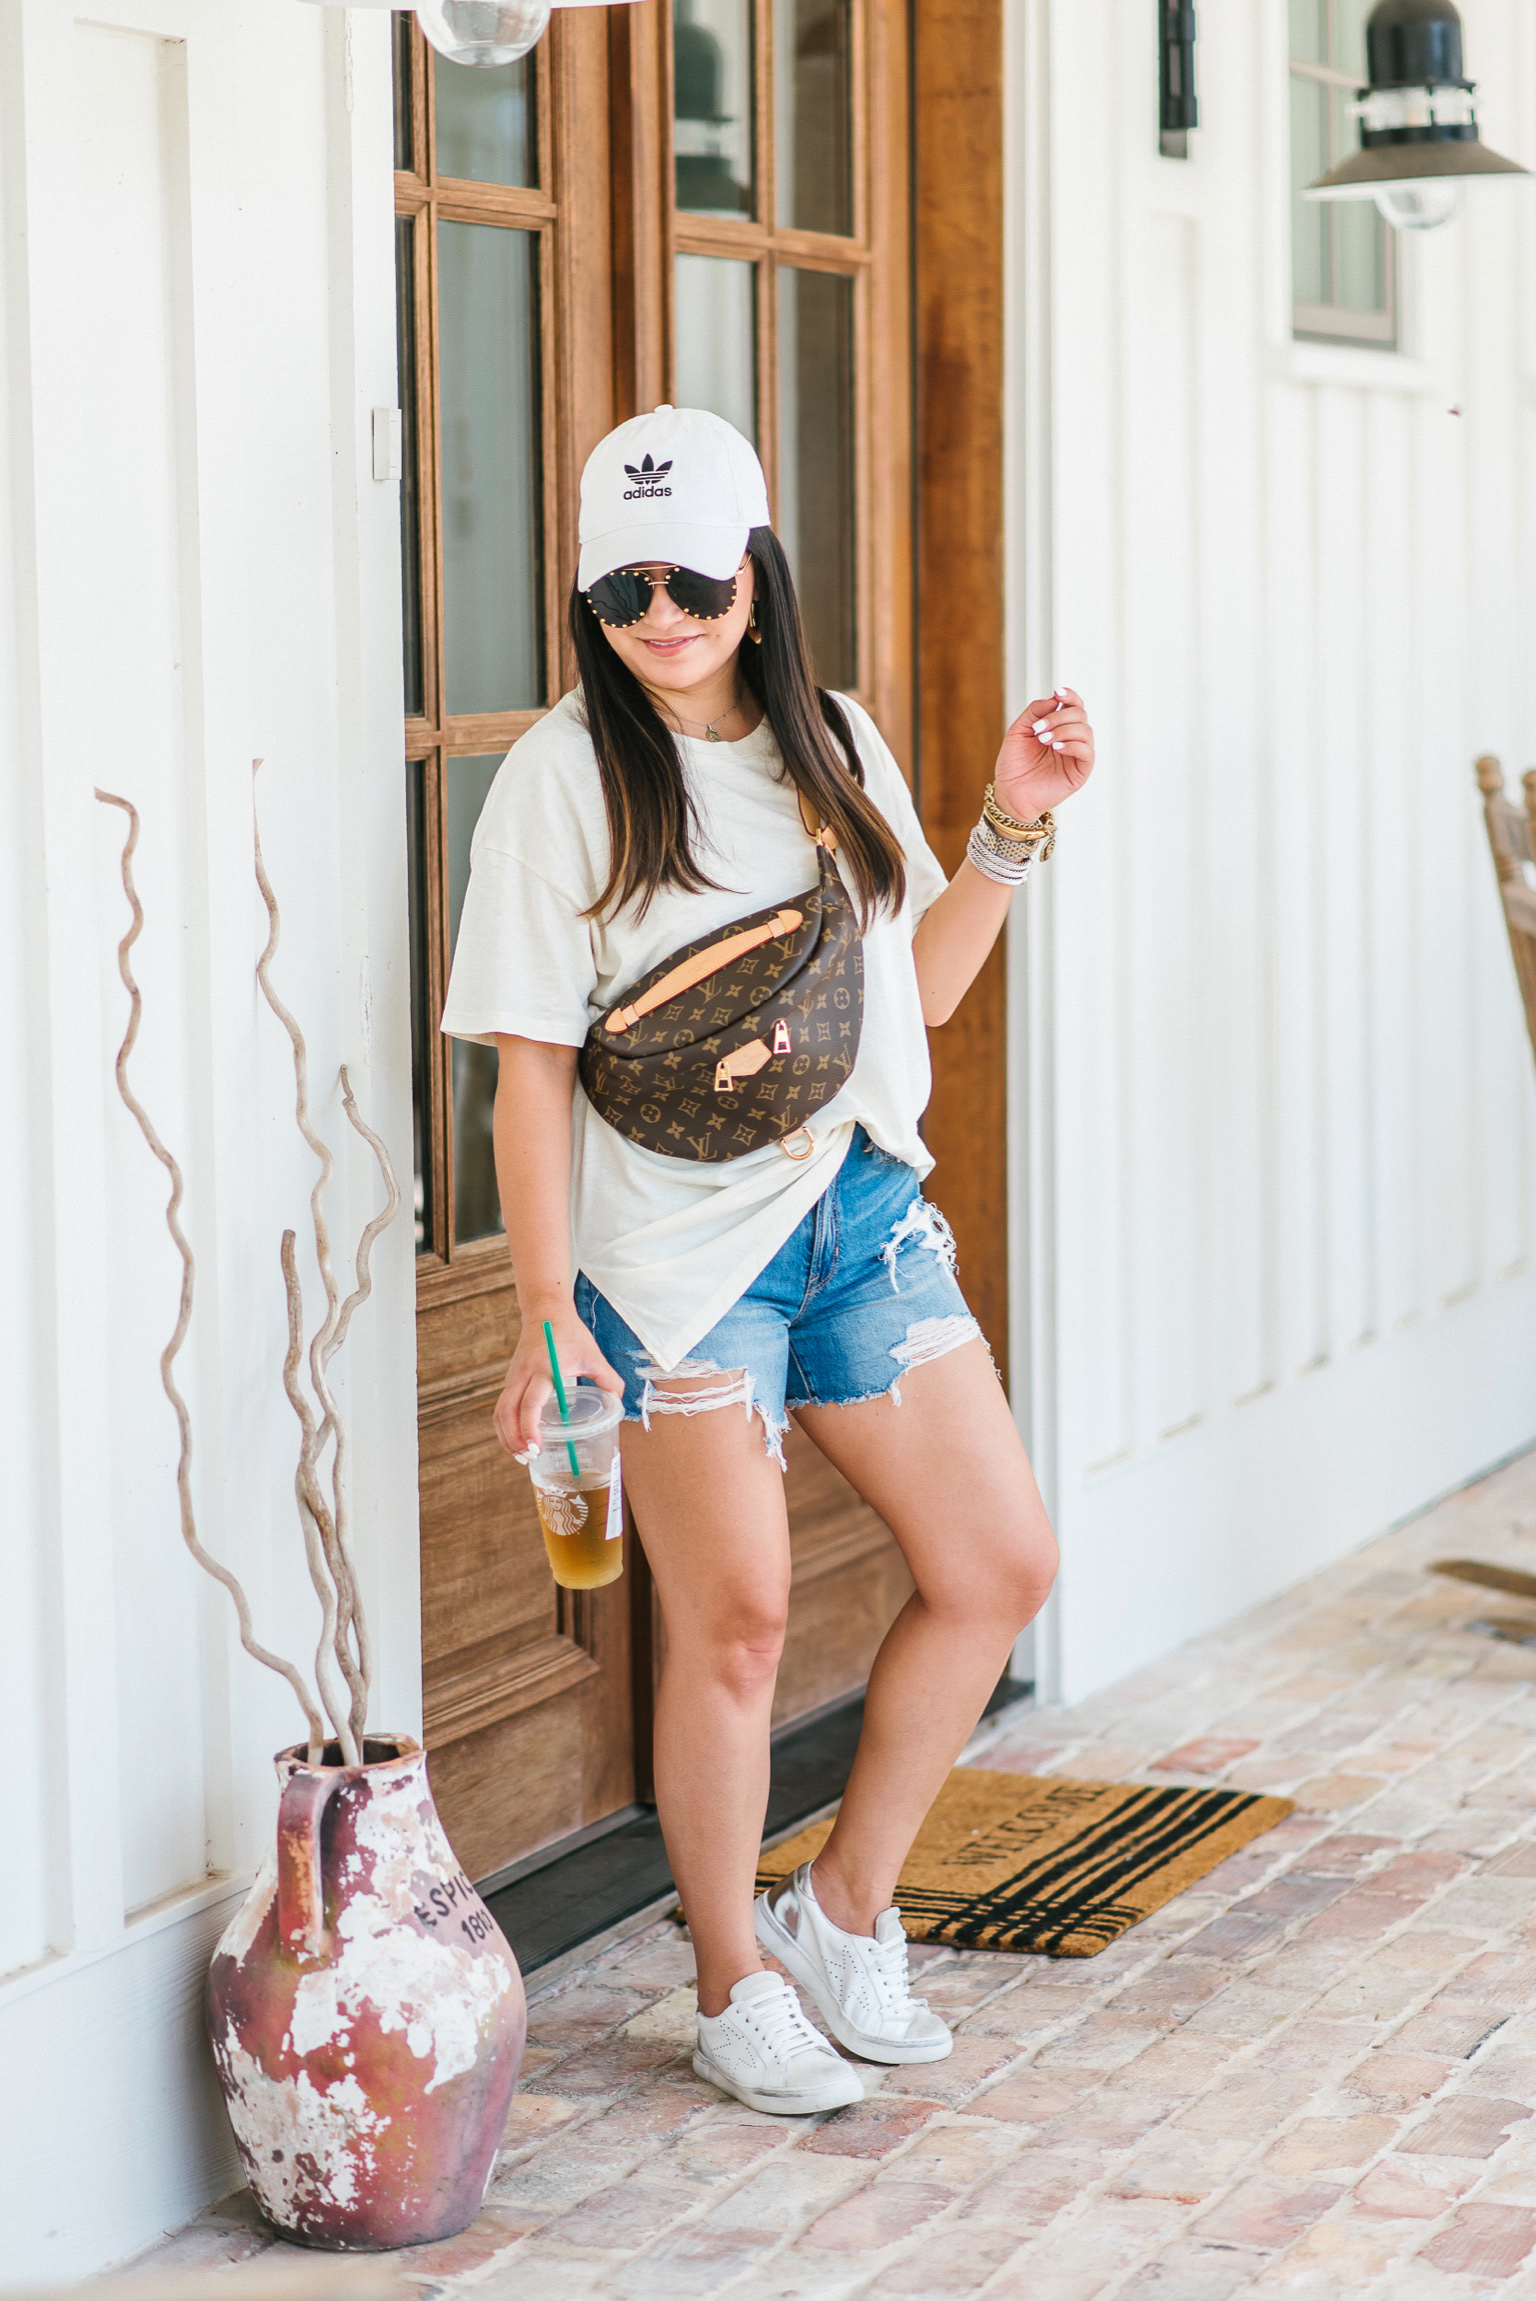 How to Style the Louis Vuitton Bumbag + Full Range Details and